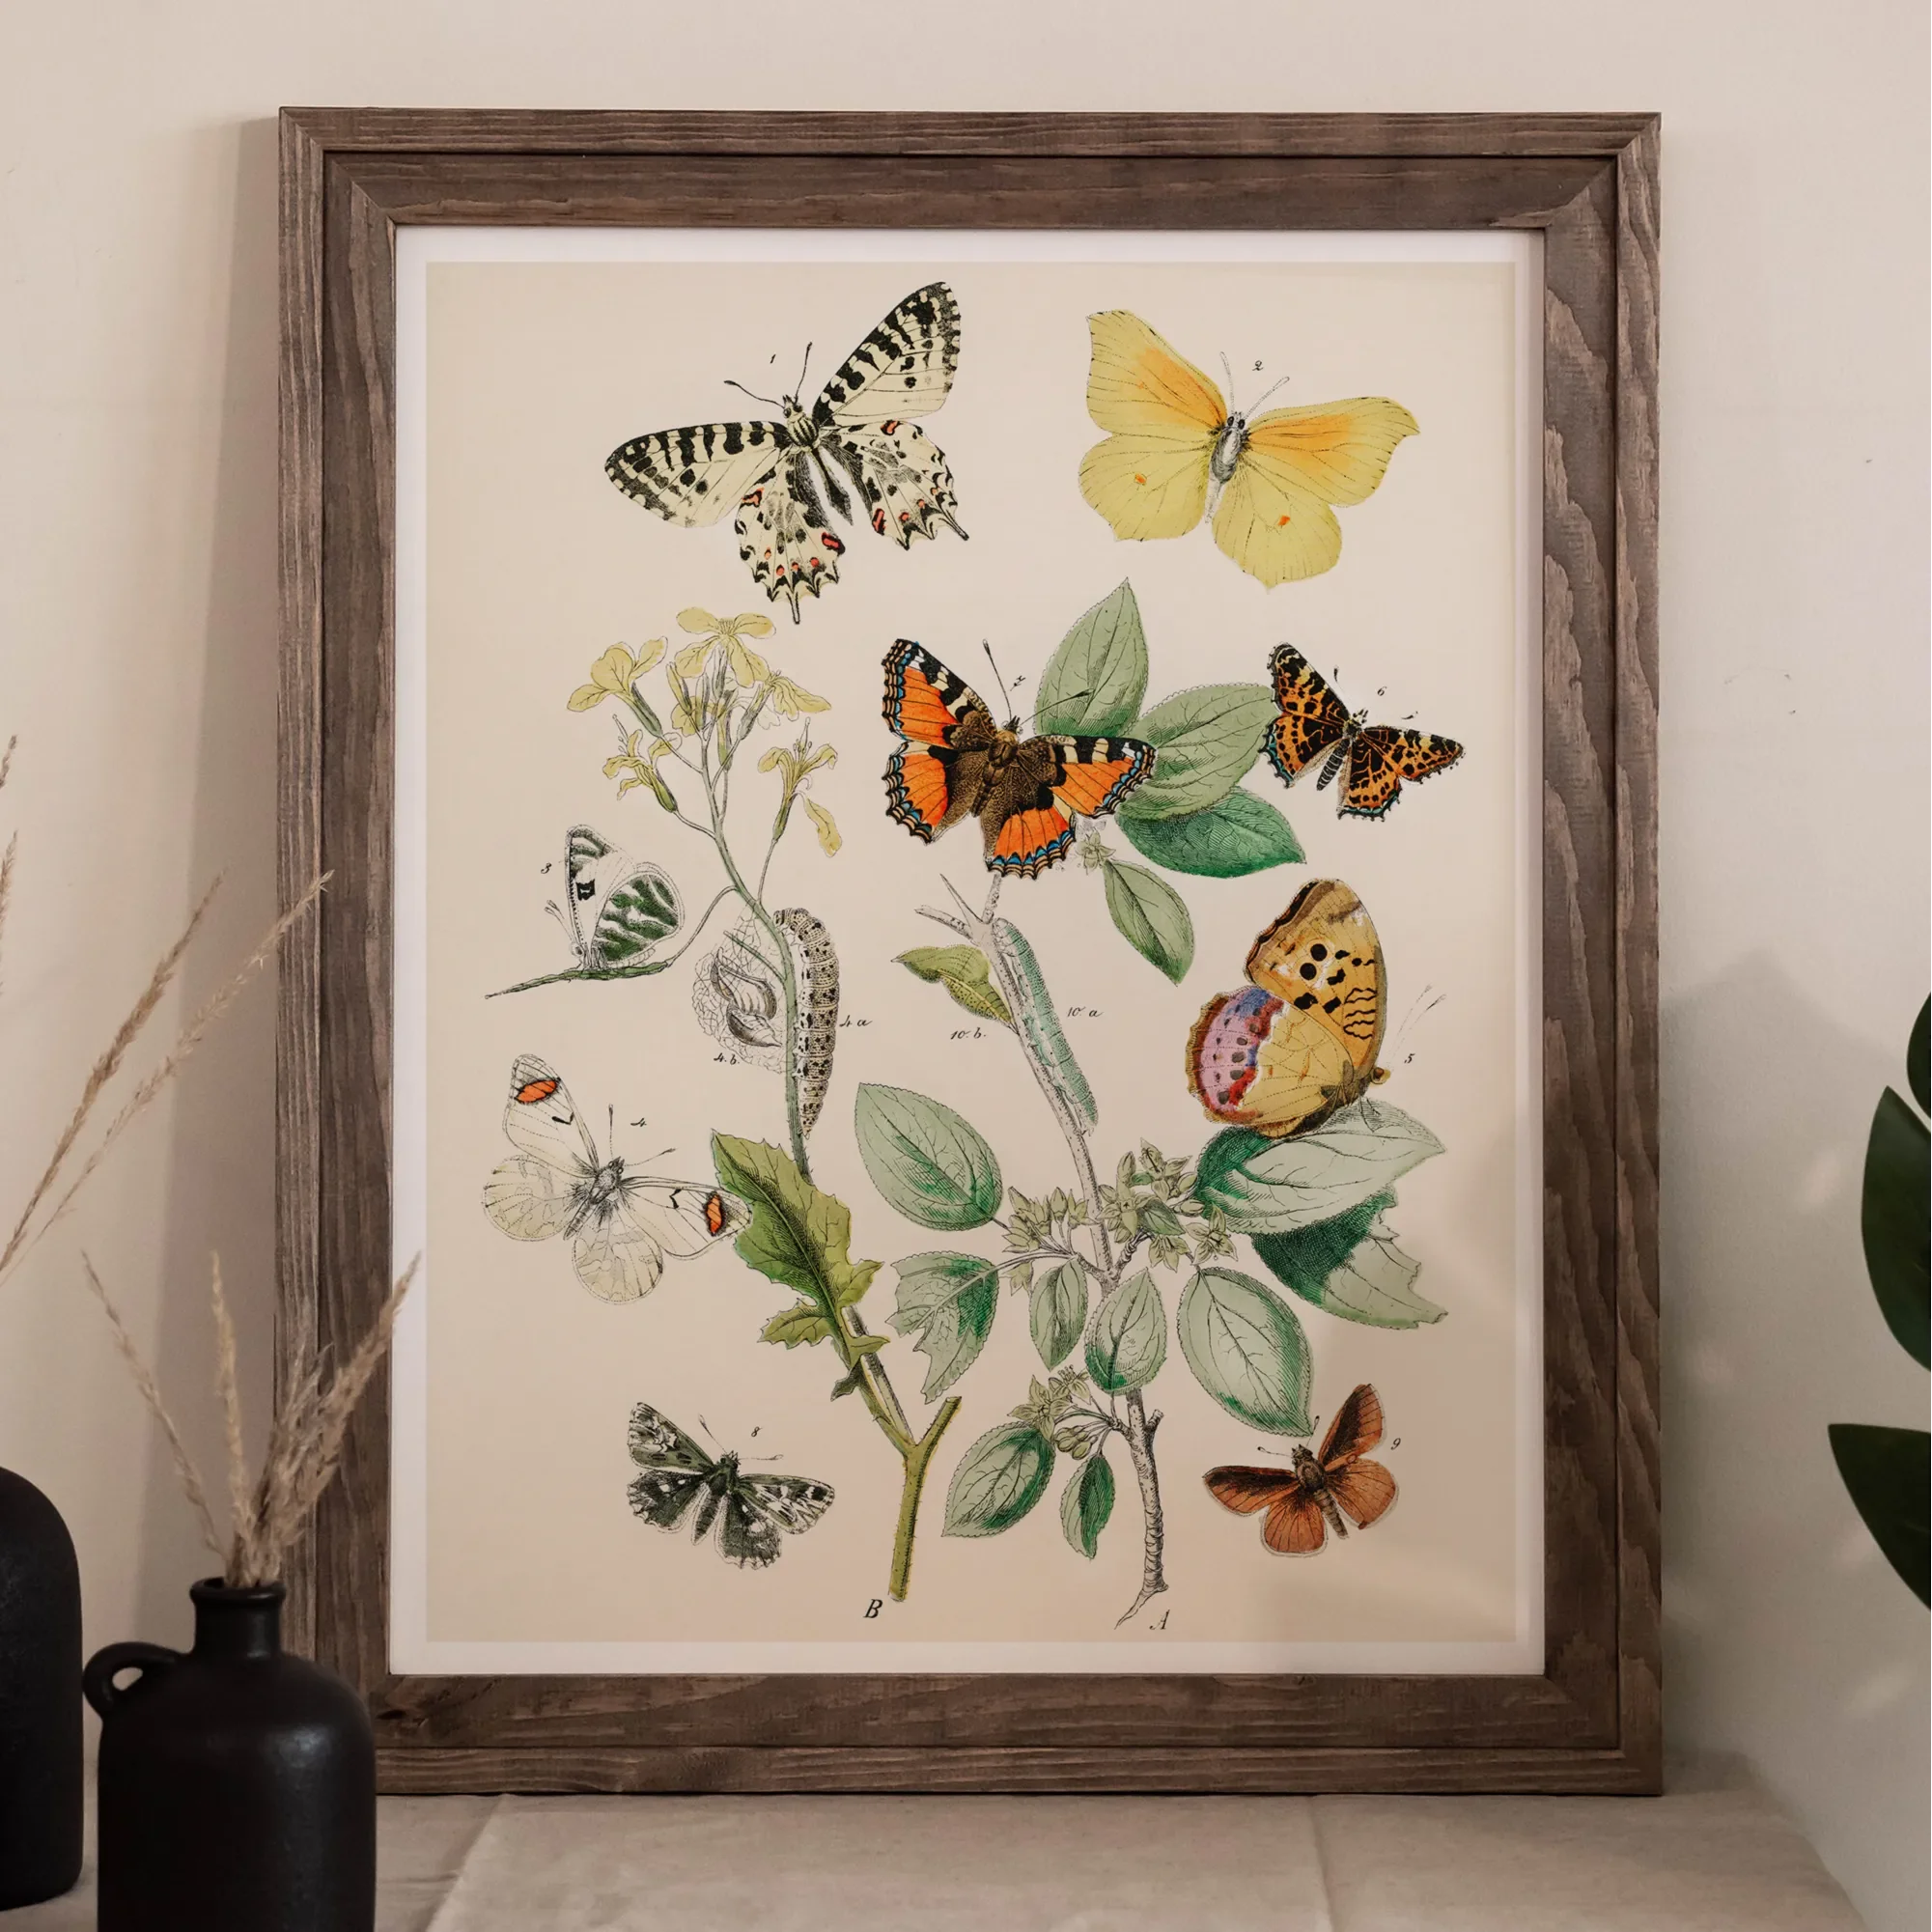 European Butterflies And Moths 3 - William Forsell Kirby Fine Art Print - 16’x20’ - Posters Prints & Visual Artwork